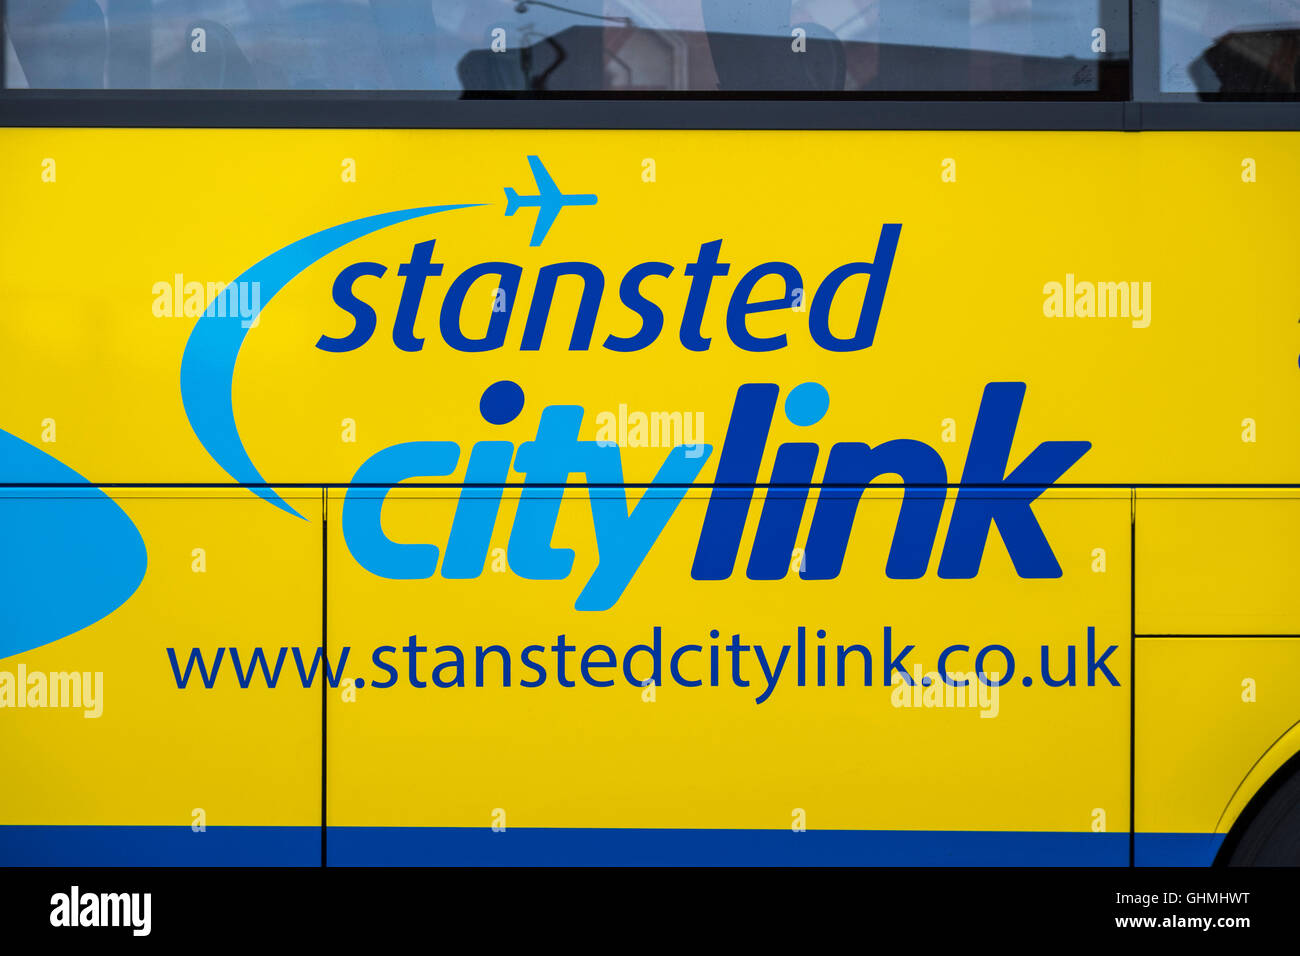 CityLink Stansted Express, Londres, Angleterre, Royaume-Uni Banque D'Images